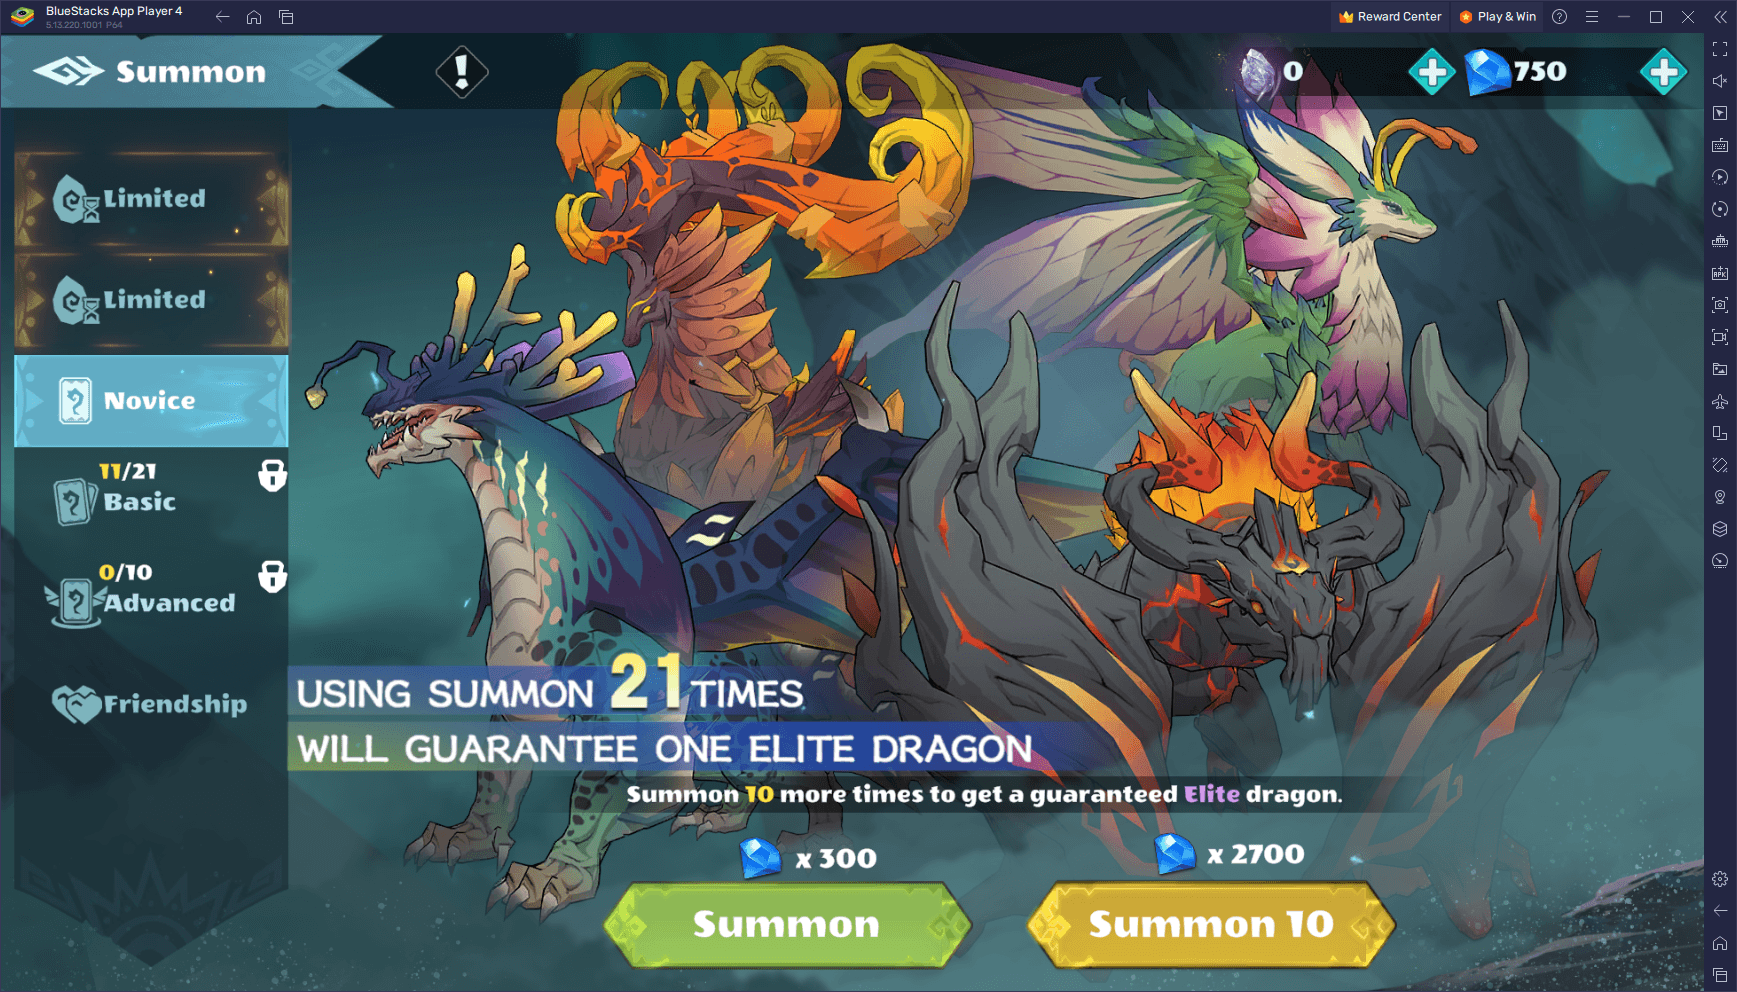 Summon Dragons 2 Reroll Guide – Unlock Powerful Dragons from the Beginning